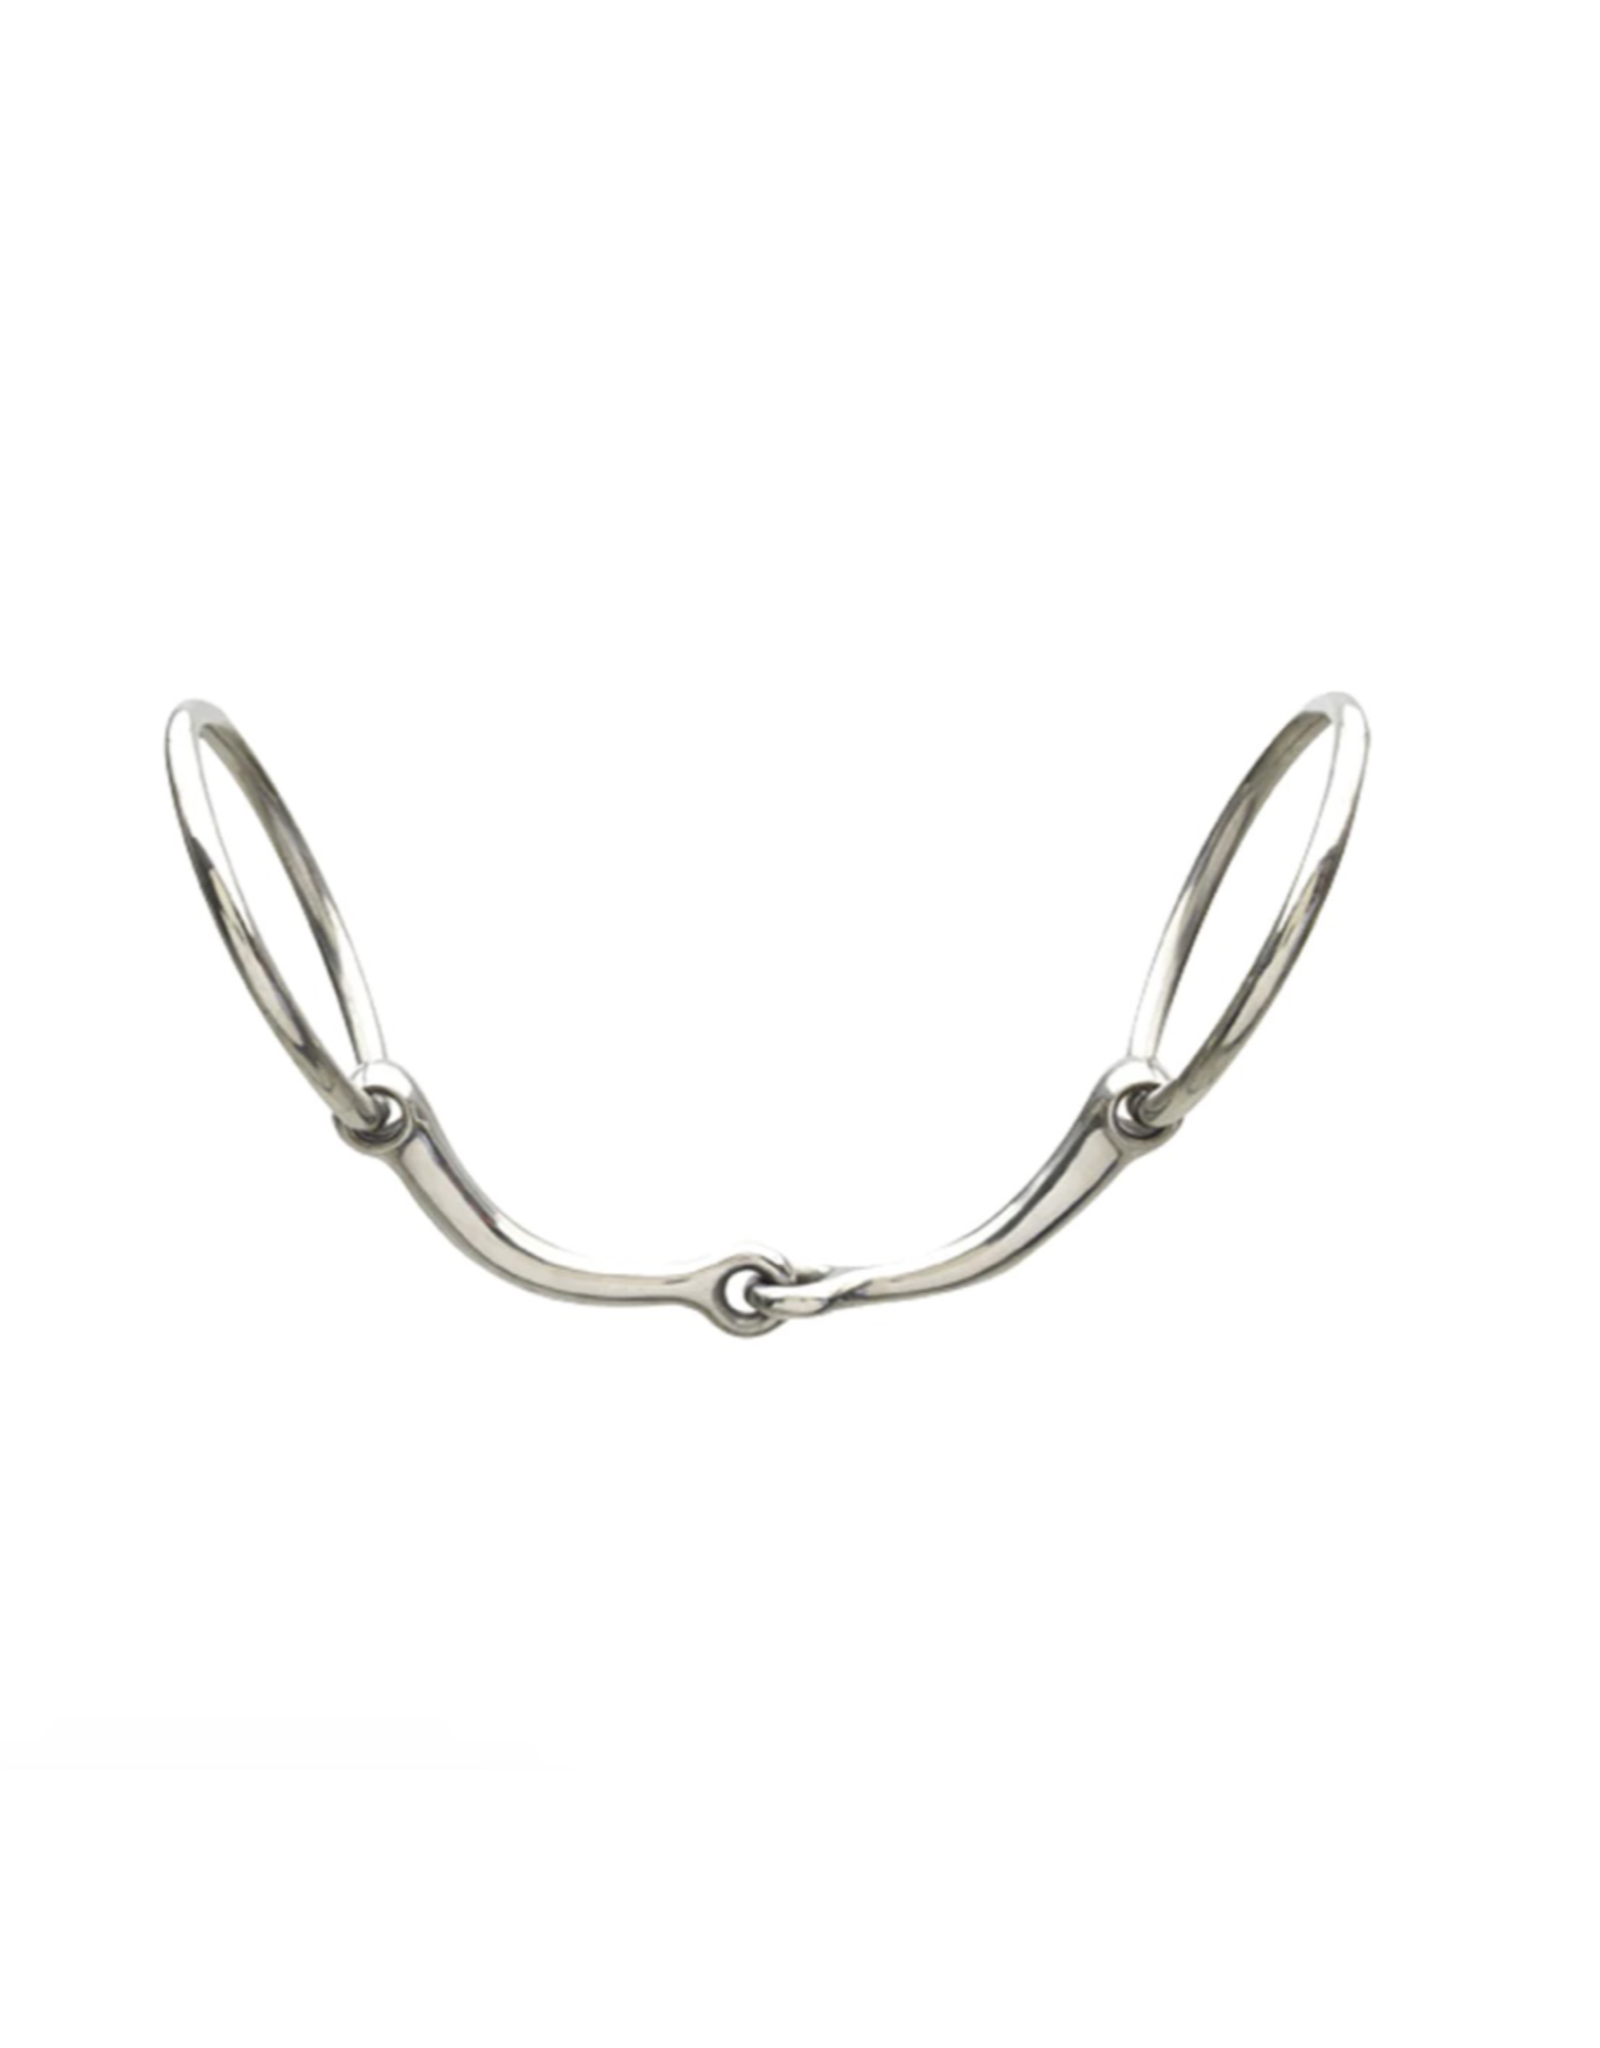 Ovation Curved Snaffle Loose Ring